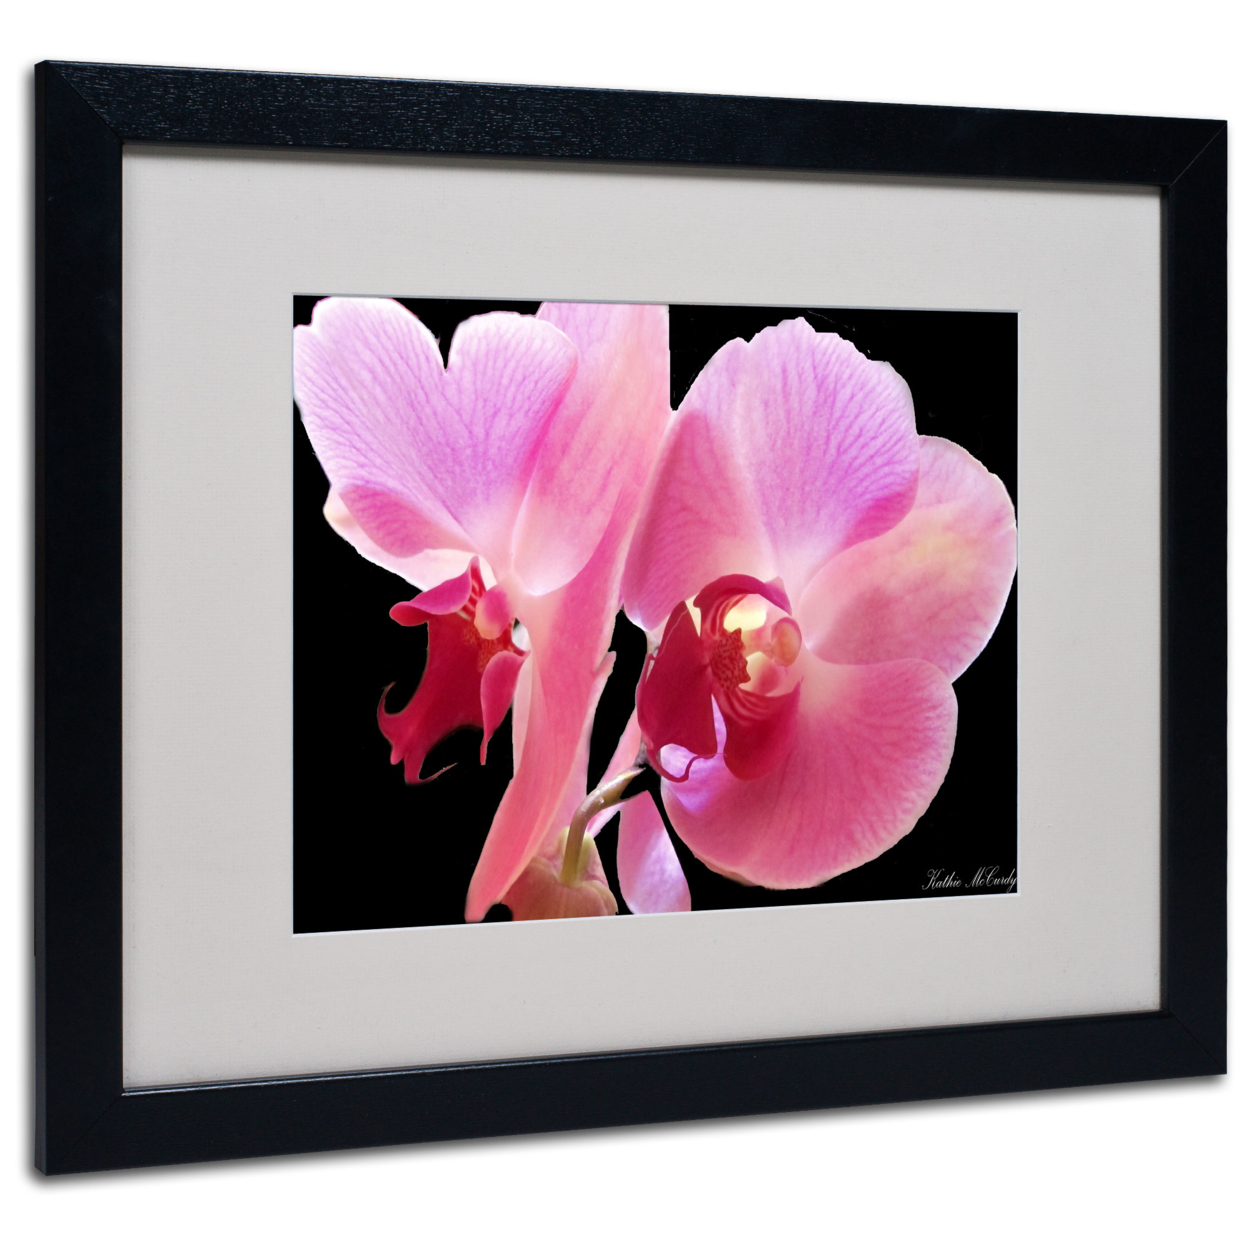 Kathie McCurdy 'Orchid' Black Wooden Framed Art 18 X 22 Inches